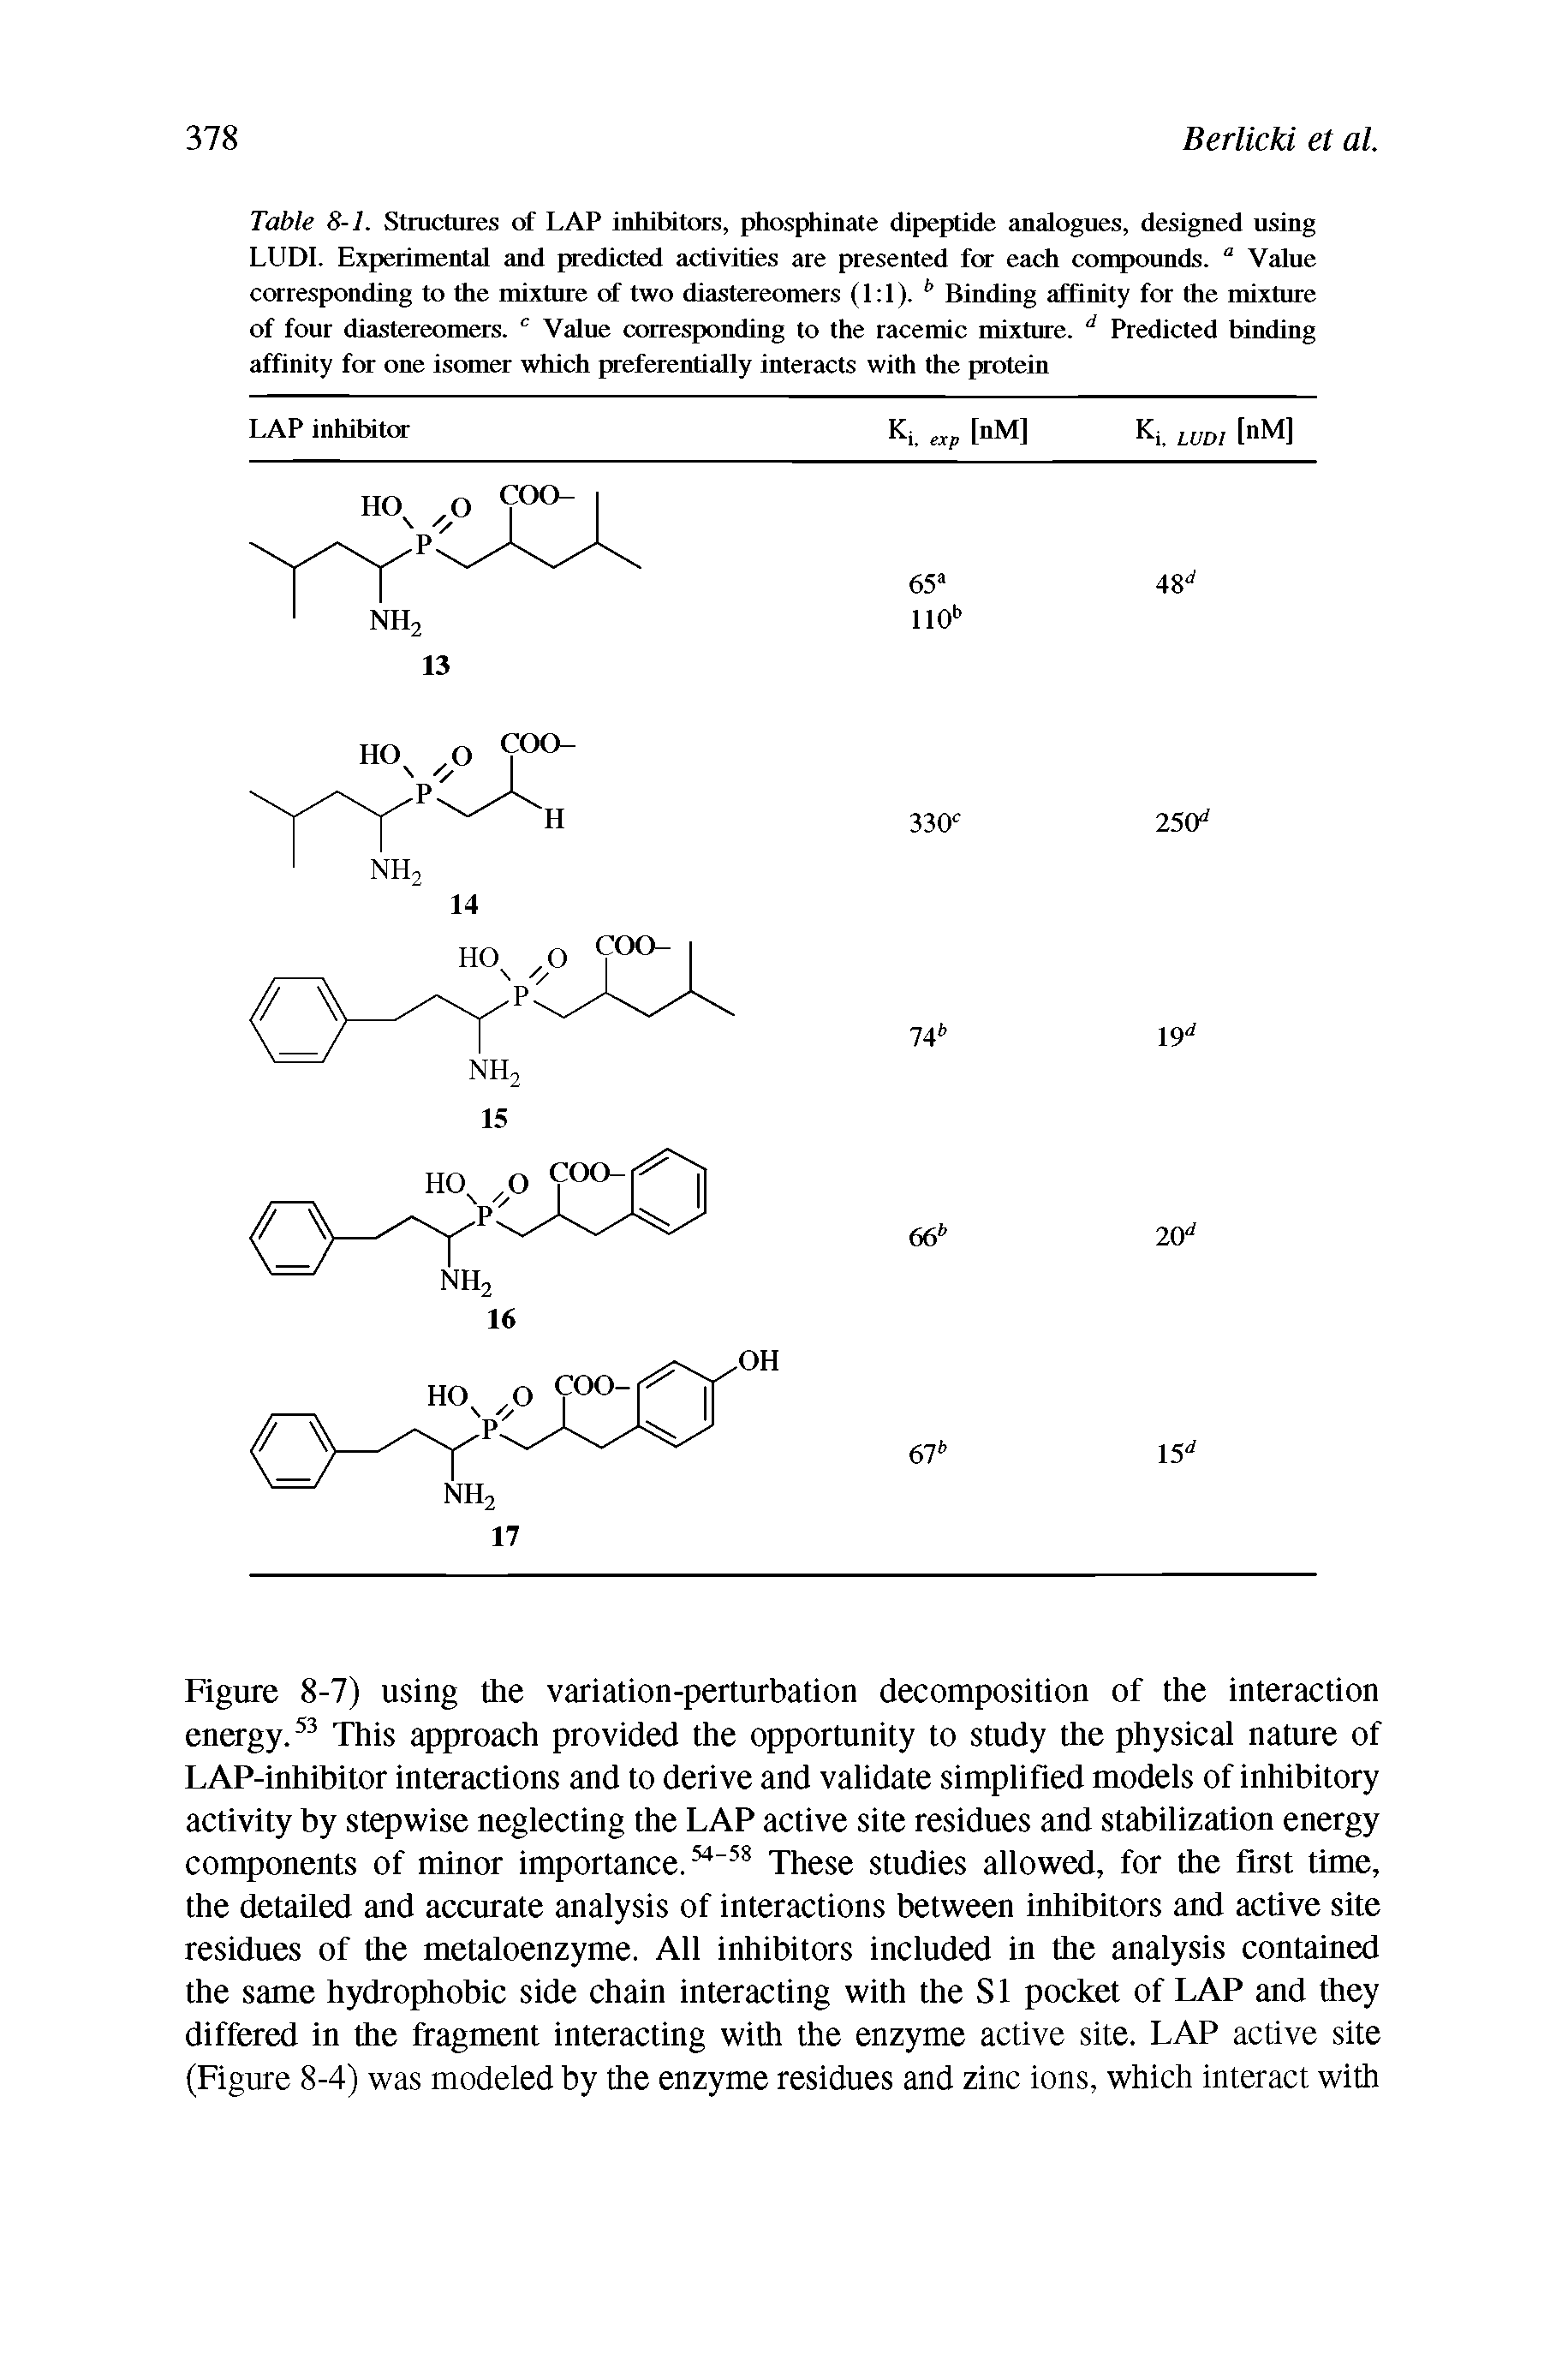 Table 8-1. Structures of LAP inhibitors, phosphinate dipeptide analogues, designed using LUDI. Experimental and predicted activities are presented for each compounds. a Value corresponding to the mixture of two diastereomers (1 1). Binding affinity for the mixture of four diastereomers. Value corresponding to the racemic mixture. Predicted binding affinity for one isomer which preferentially interacts with the protein...